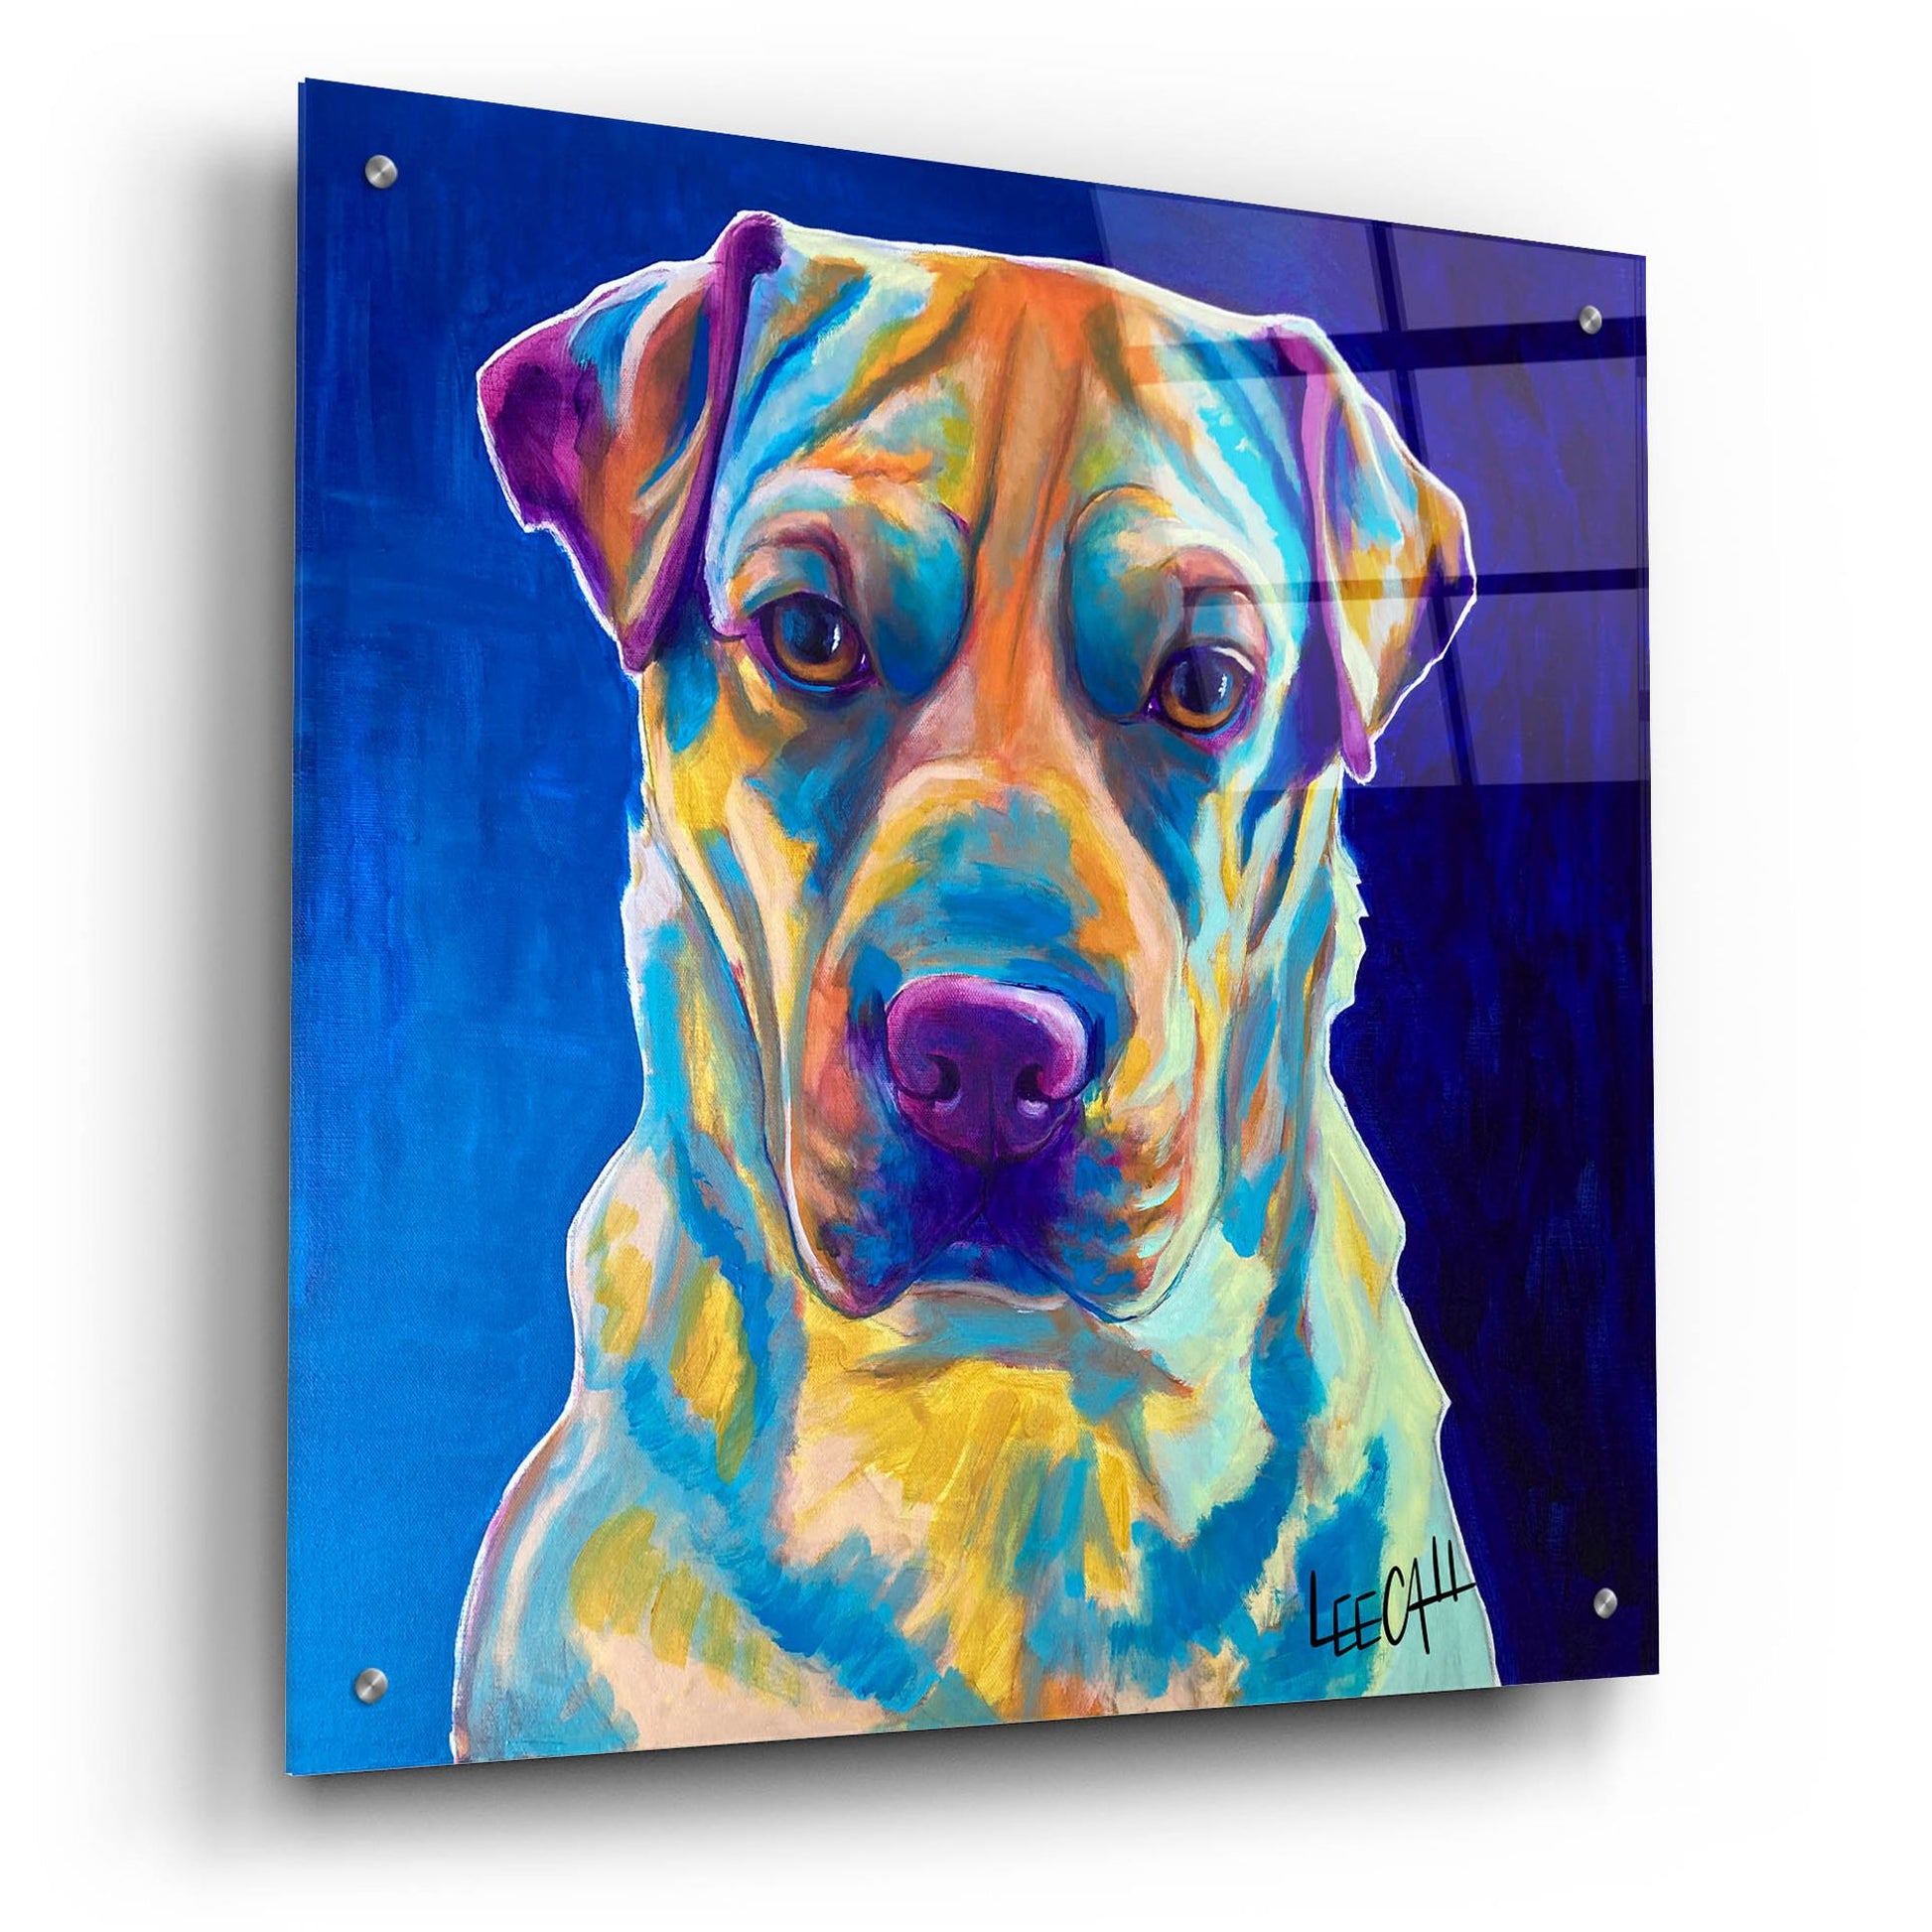 Epic Art 'Ethan' by Dawg Painter, Acrylic Glass Wall Art,24x24